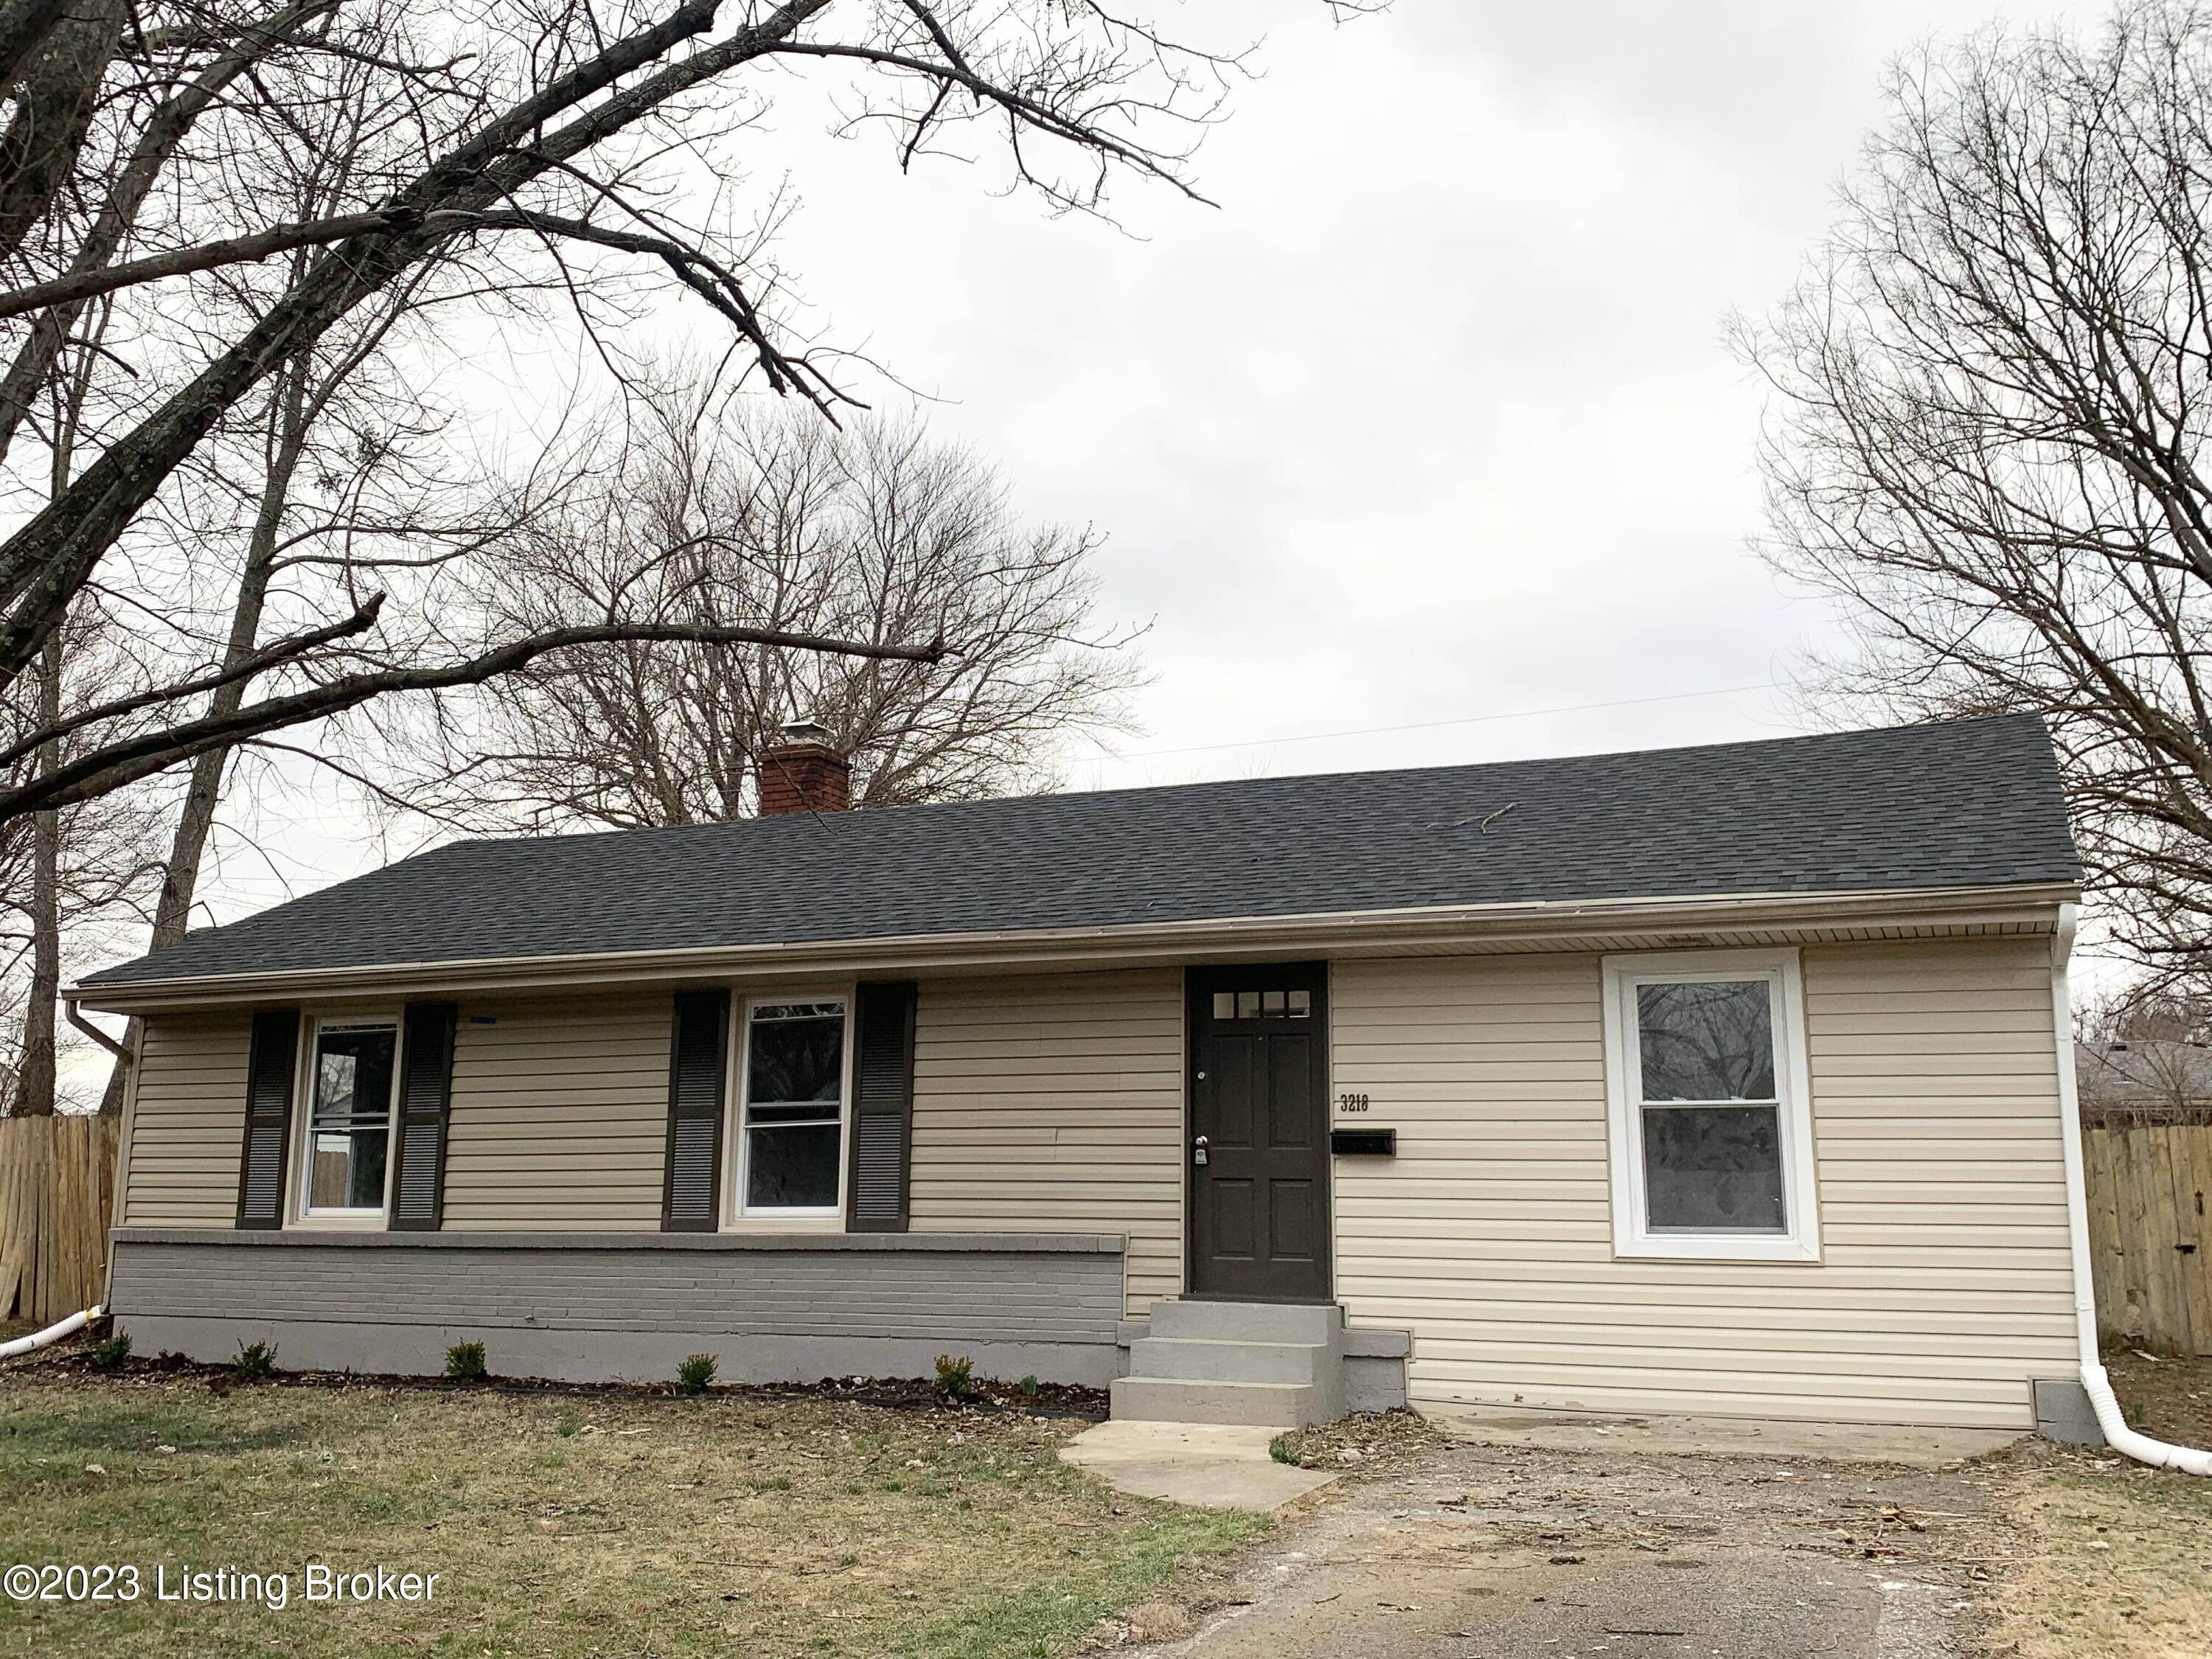 Single Family at Louisville, KY 40218